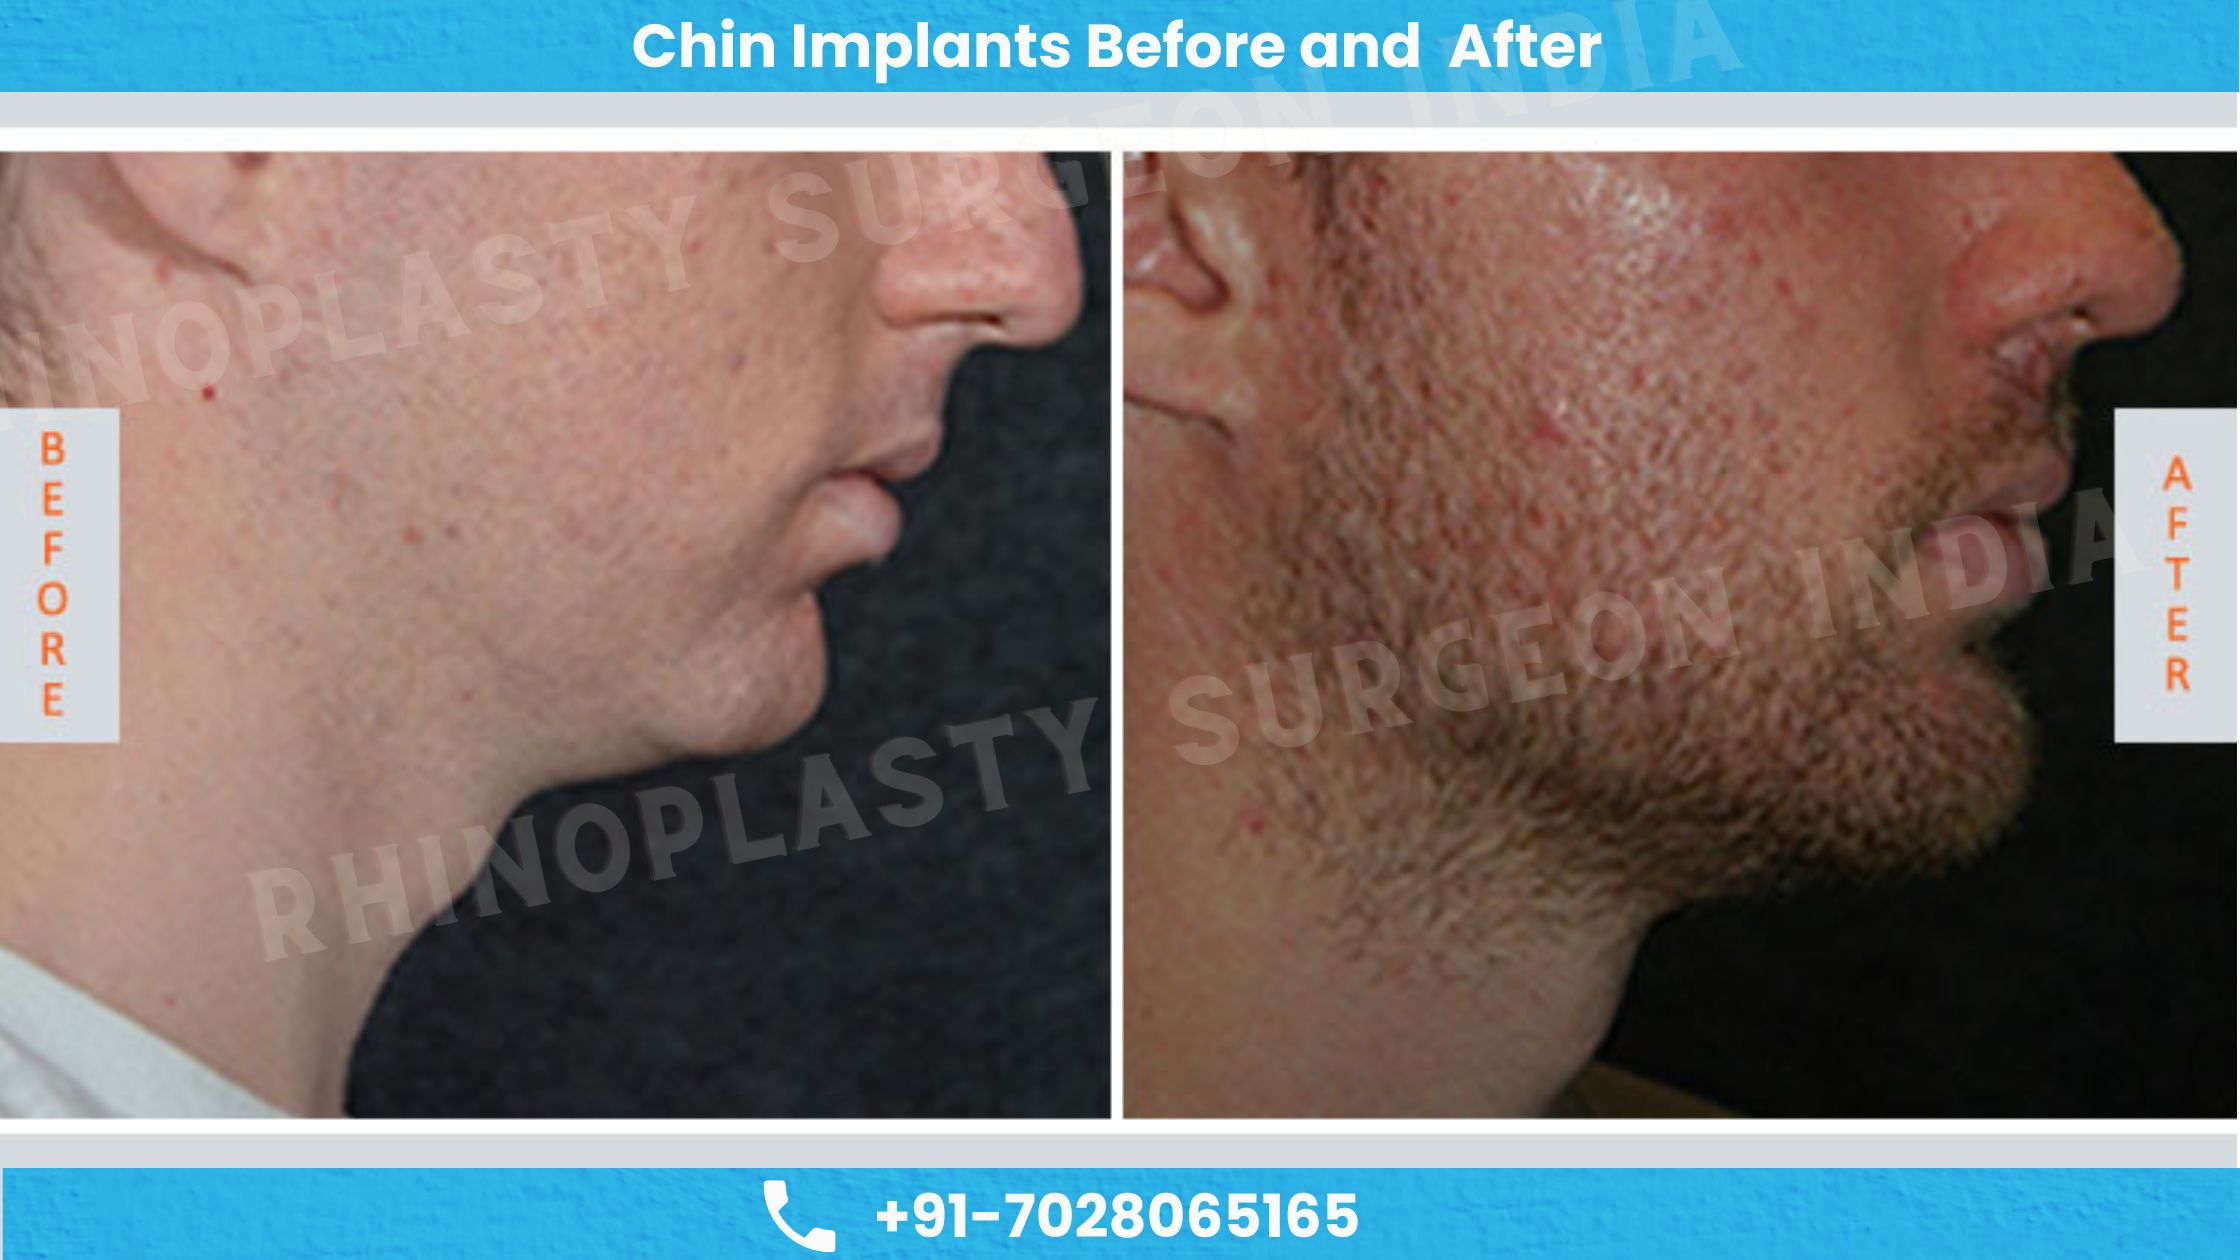 Before and after images of chin implants